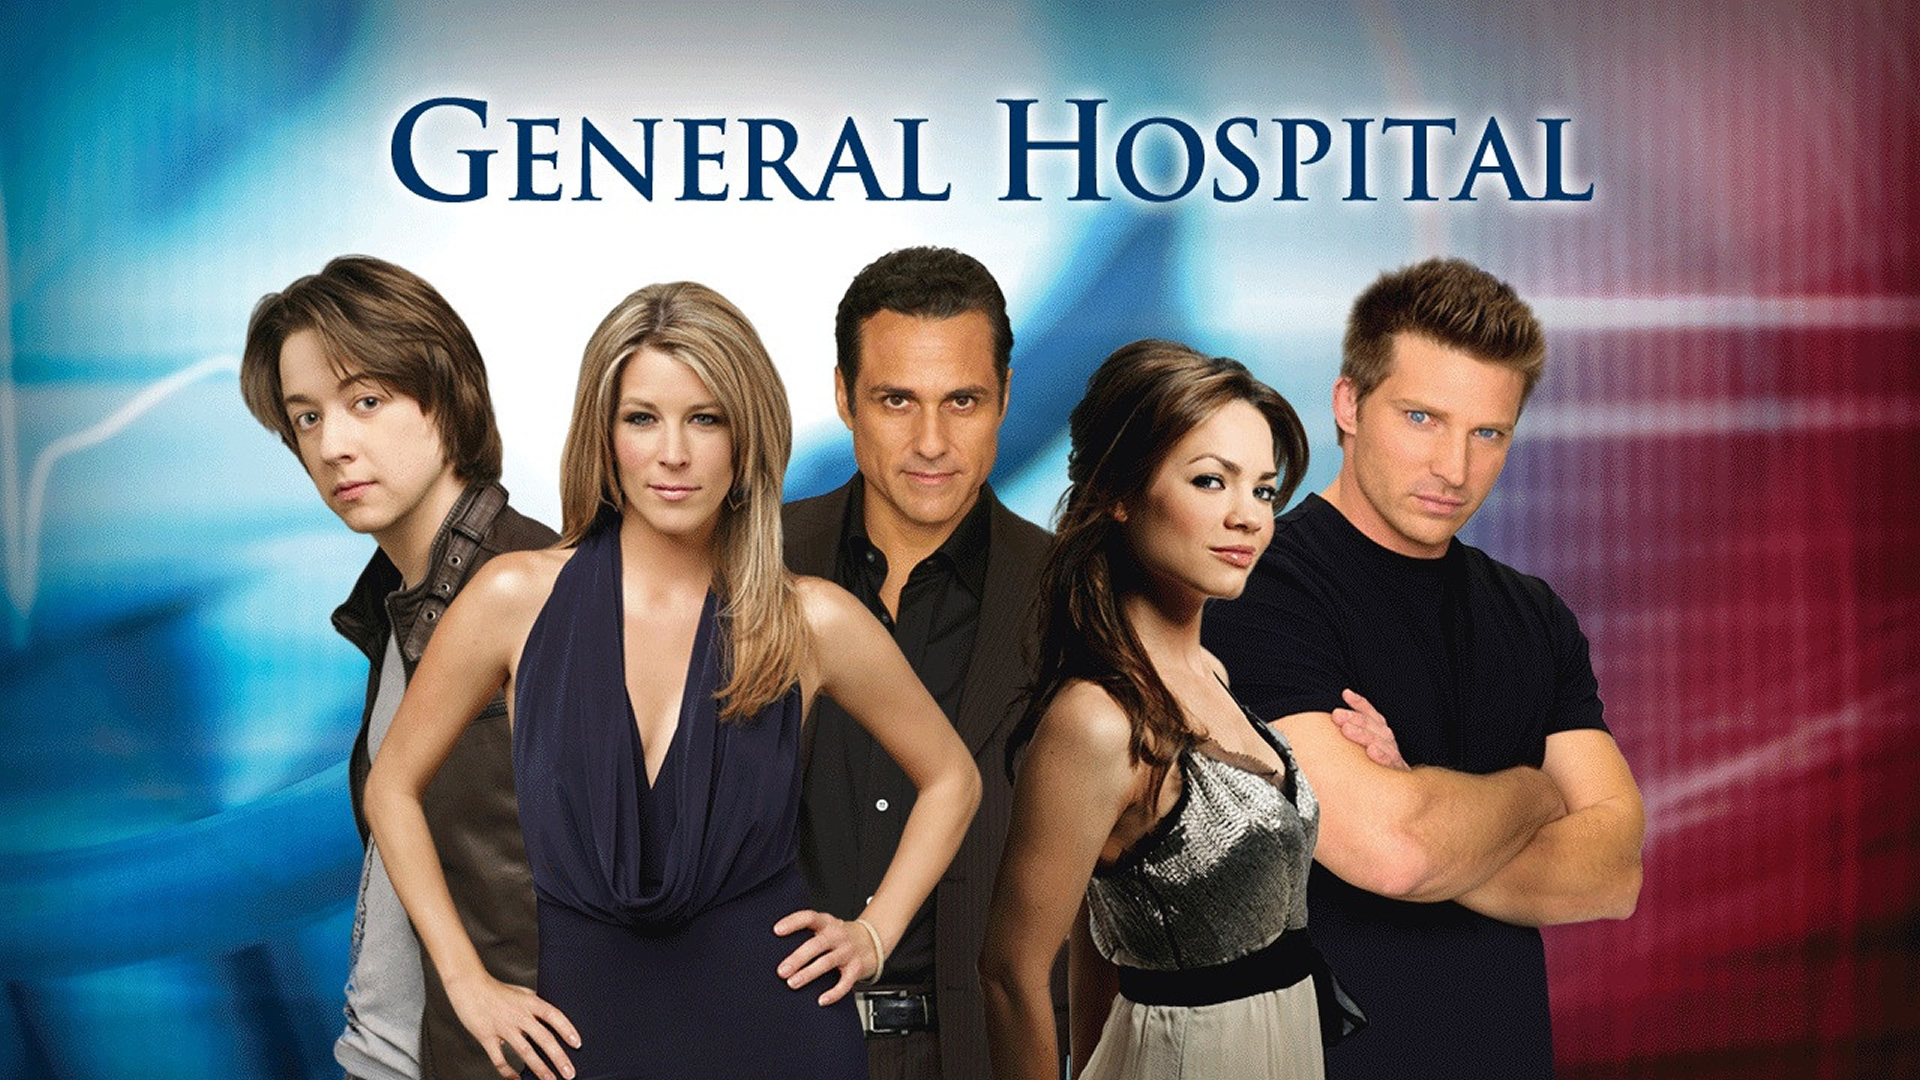 General Hospital Valentin is Shocked and Discovers that Victor Cassadine is His Father! GH Spoilers